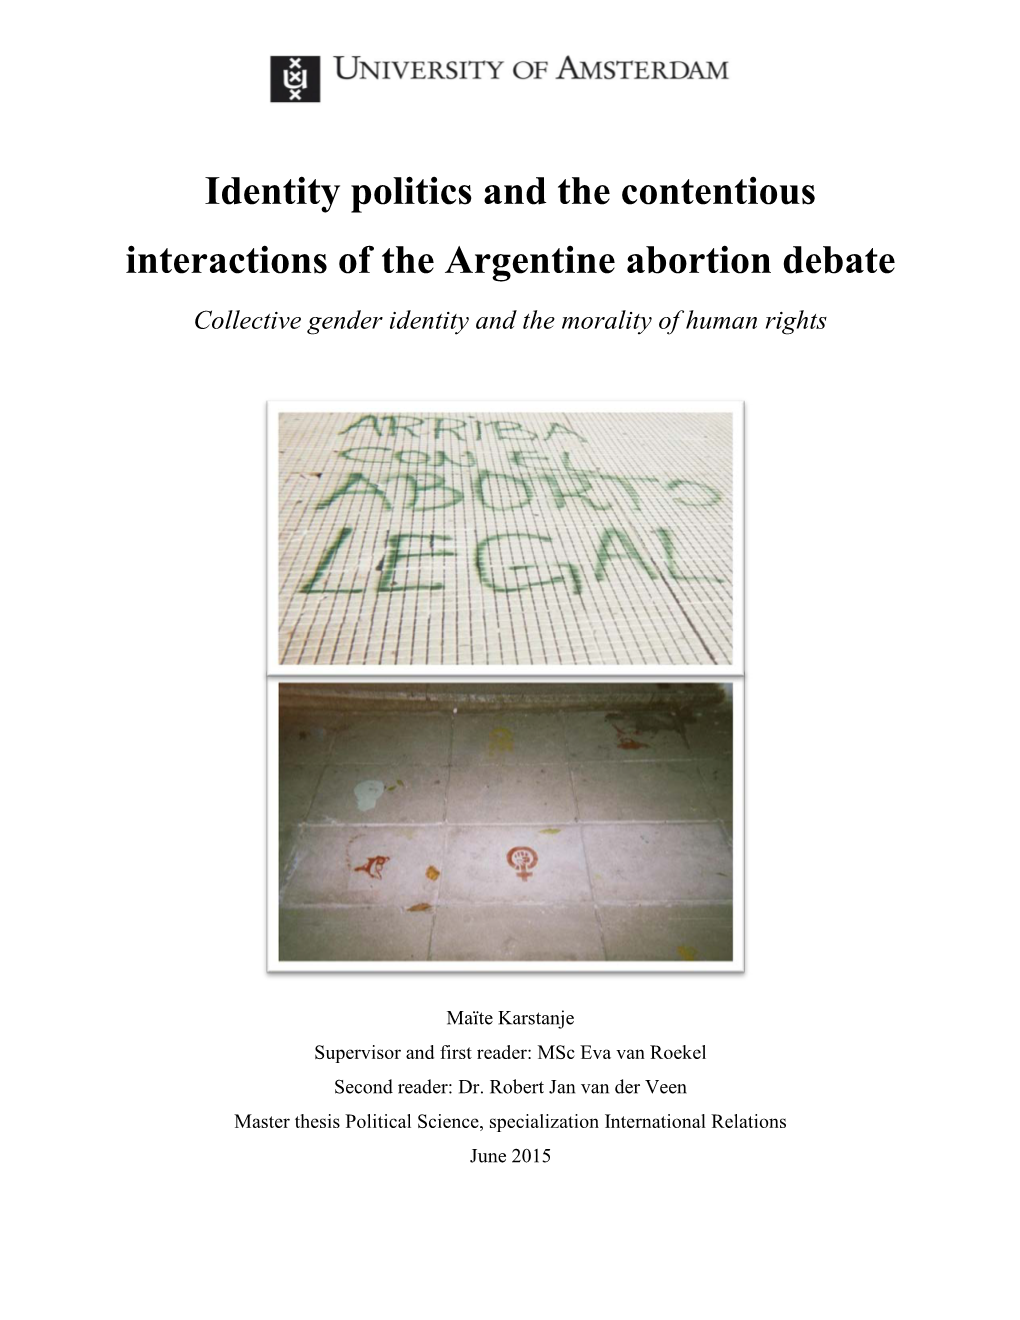 Identity Politics and the Contentious Interactions of the Argentine Abortion Debate Collective Gender Identity and the Morality of Human Rights